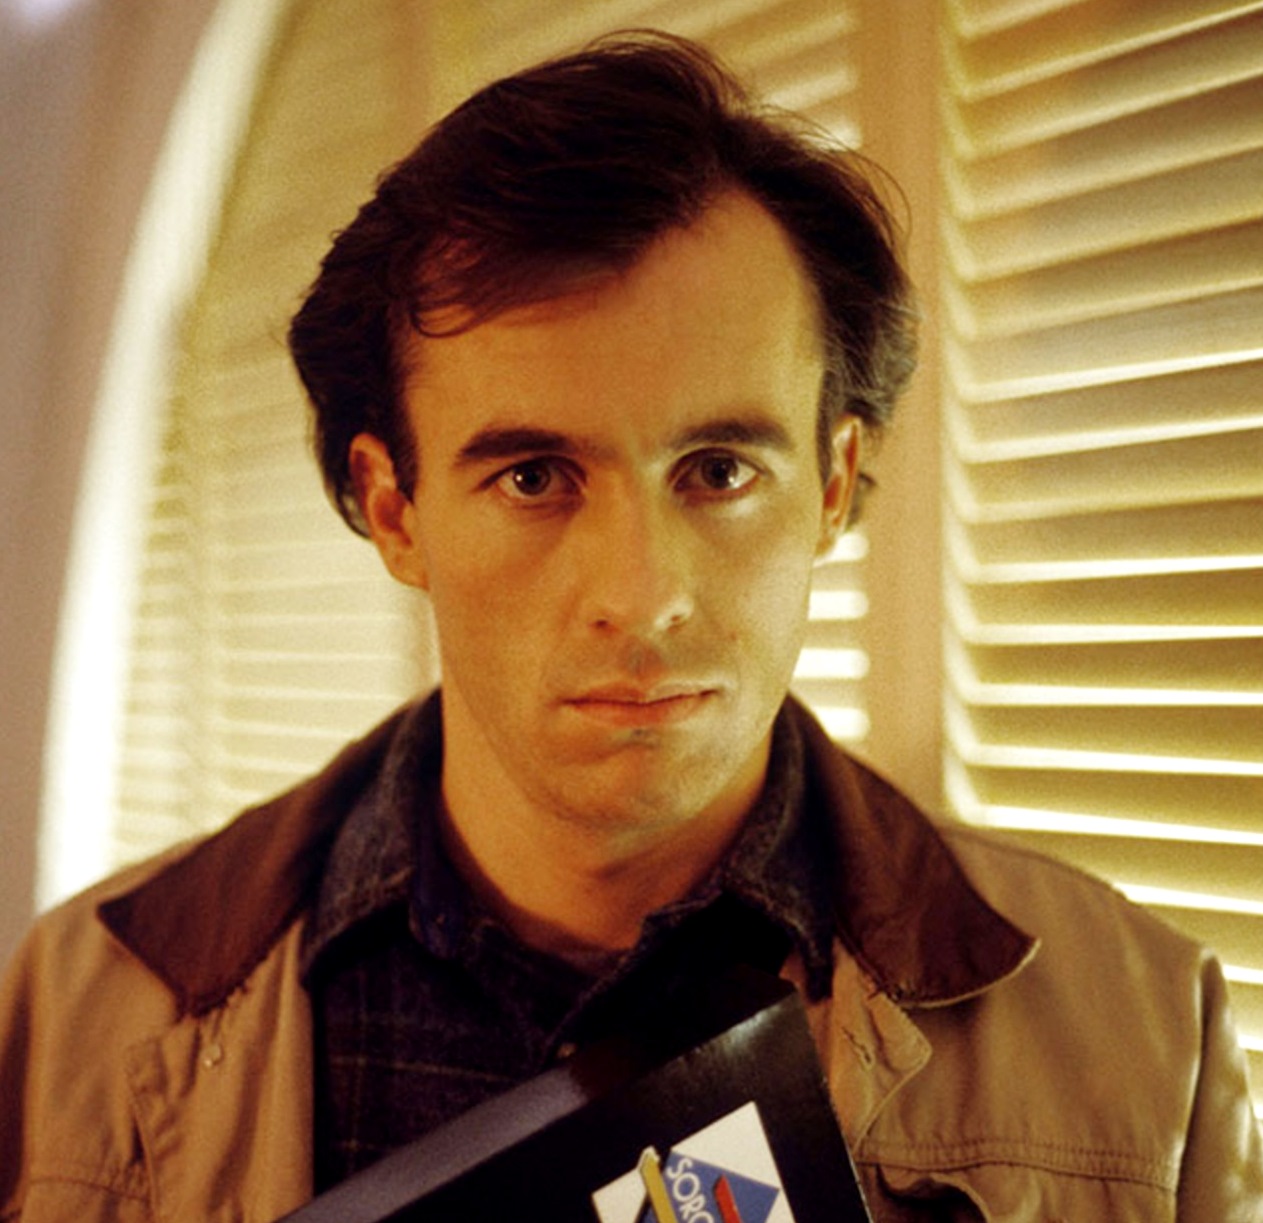 Stephen Dillon/Stephen Dillane as Nick Thorne in The One Game (1988)